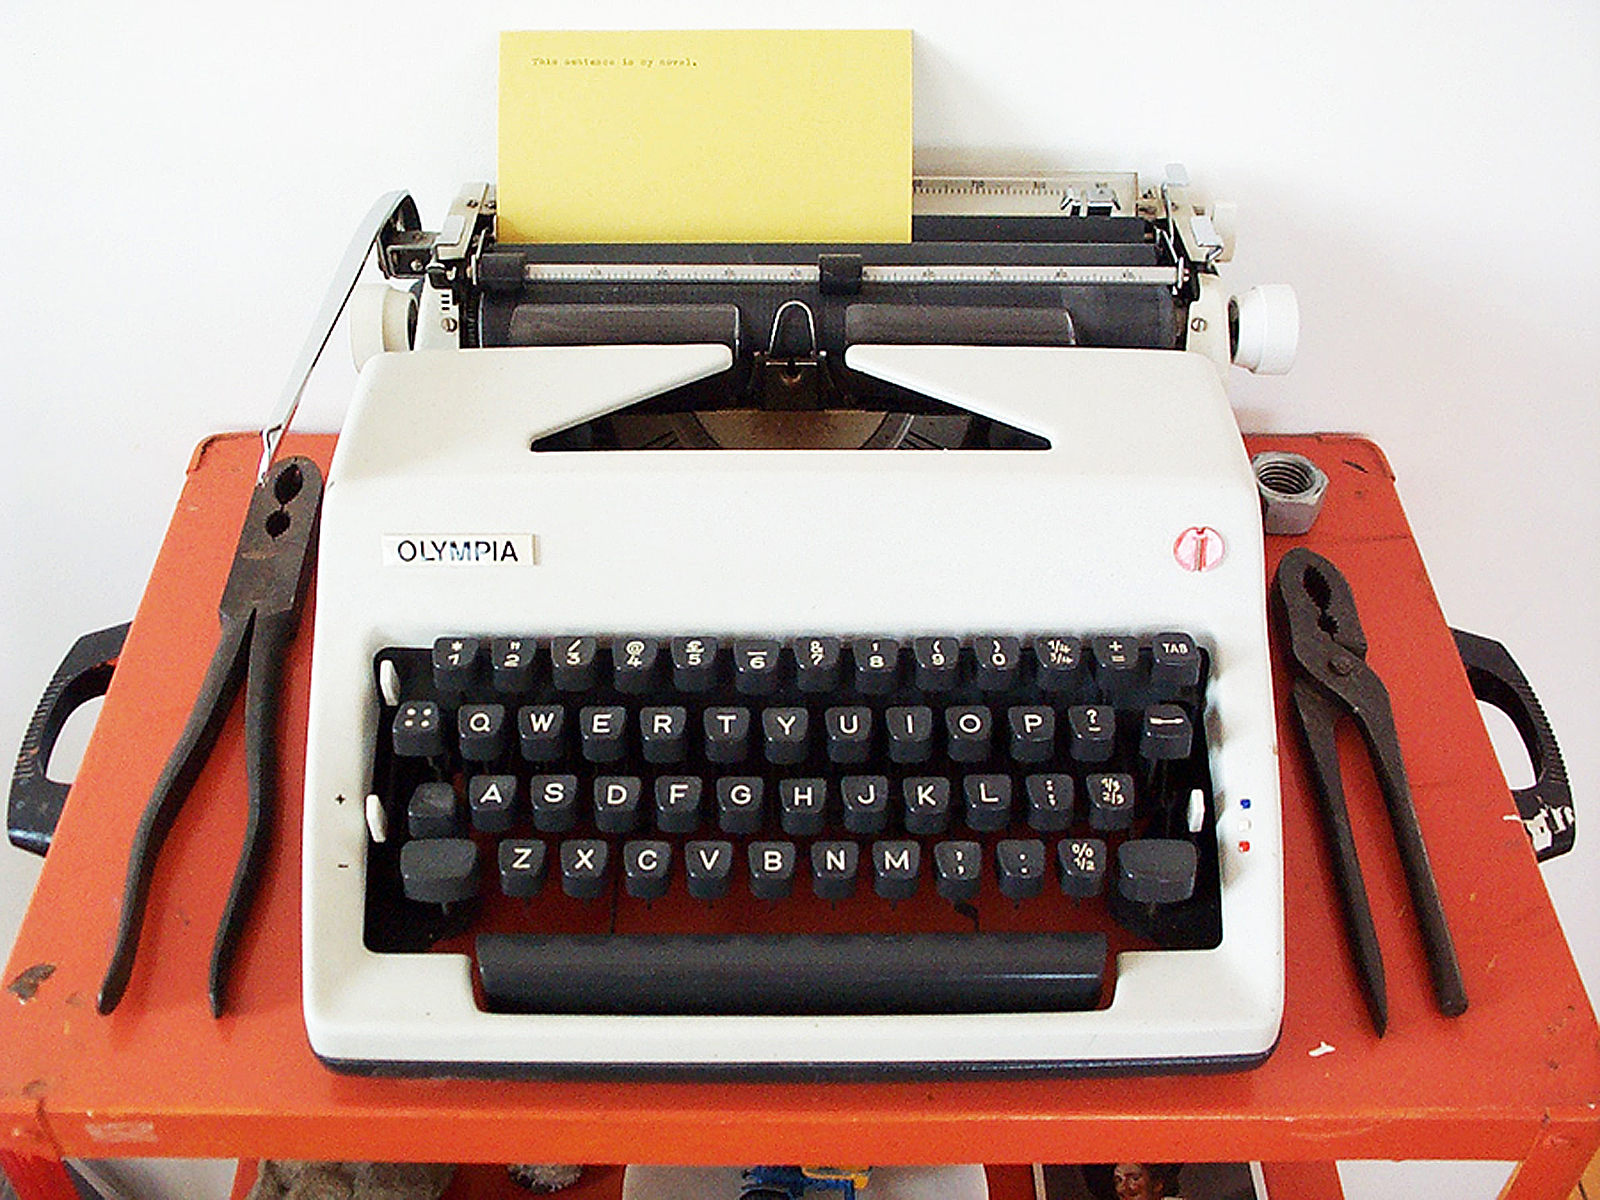 An Olympia typewriter with typed card and two pairs of pliers on an orange cart.